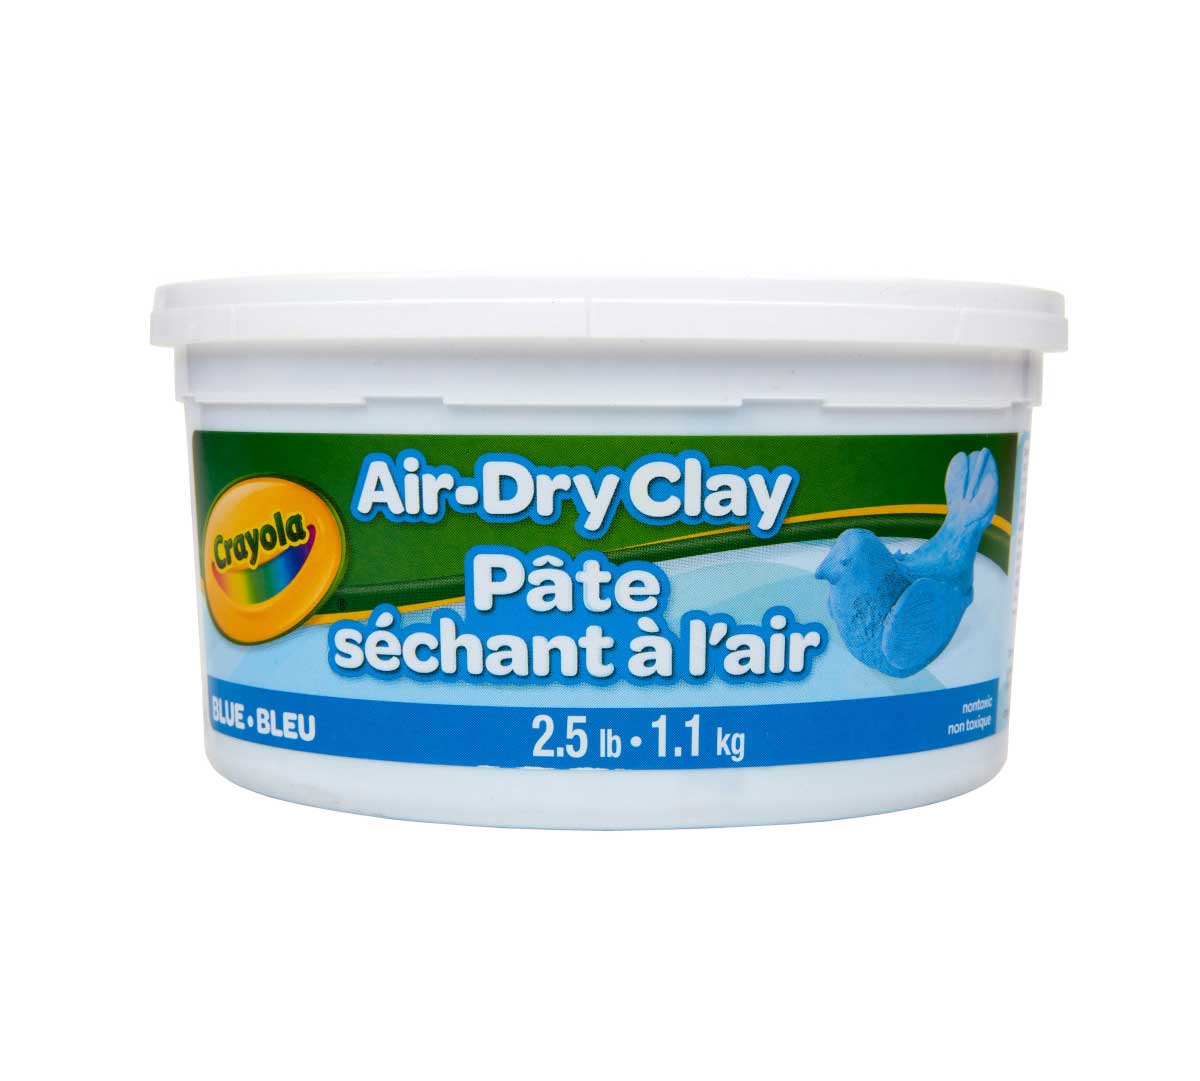 Crayola Air Dry Clay (5lb Bucket), Natural White Modeling Clay for Kids,  Sculpting Material, Craft Supplies for Classrooms [ Exclusive]